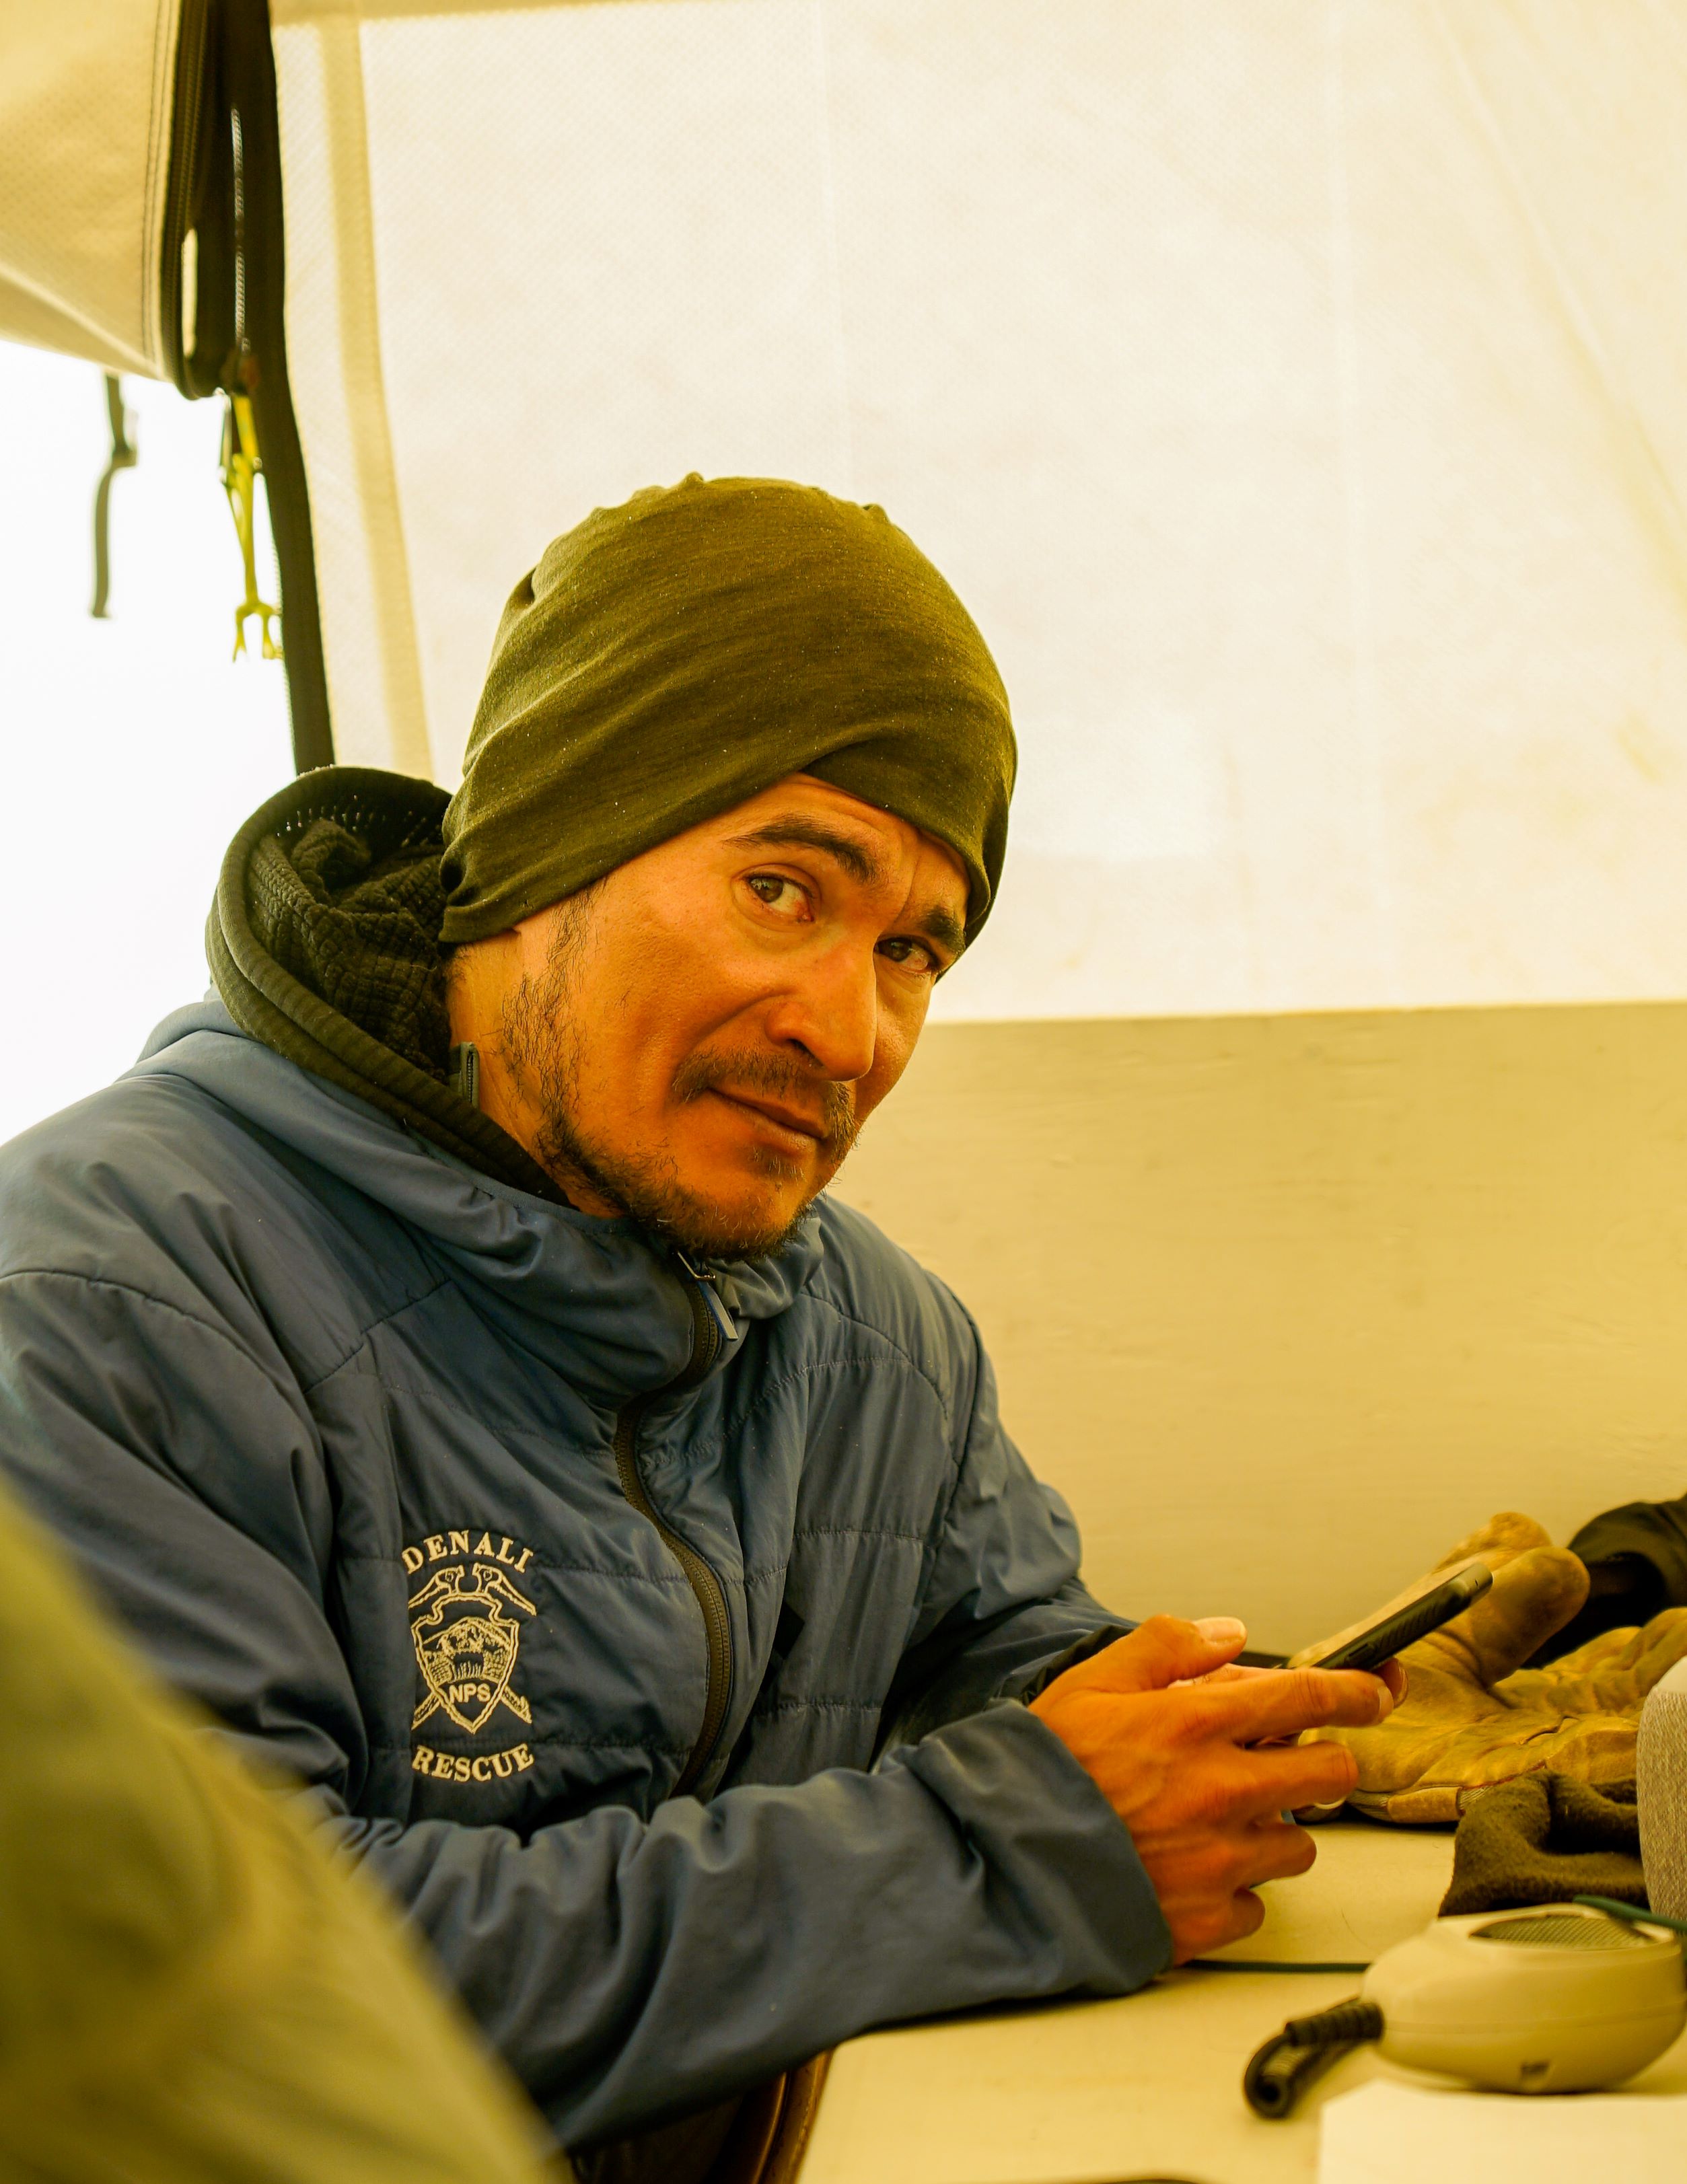 A portrait of a man in a tent on his phone wearing a blue jacket that says Denali Rescue